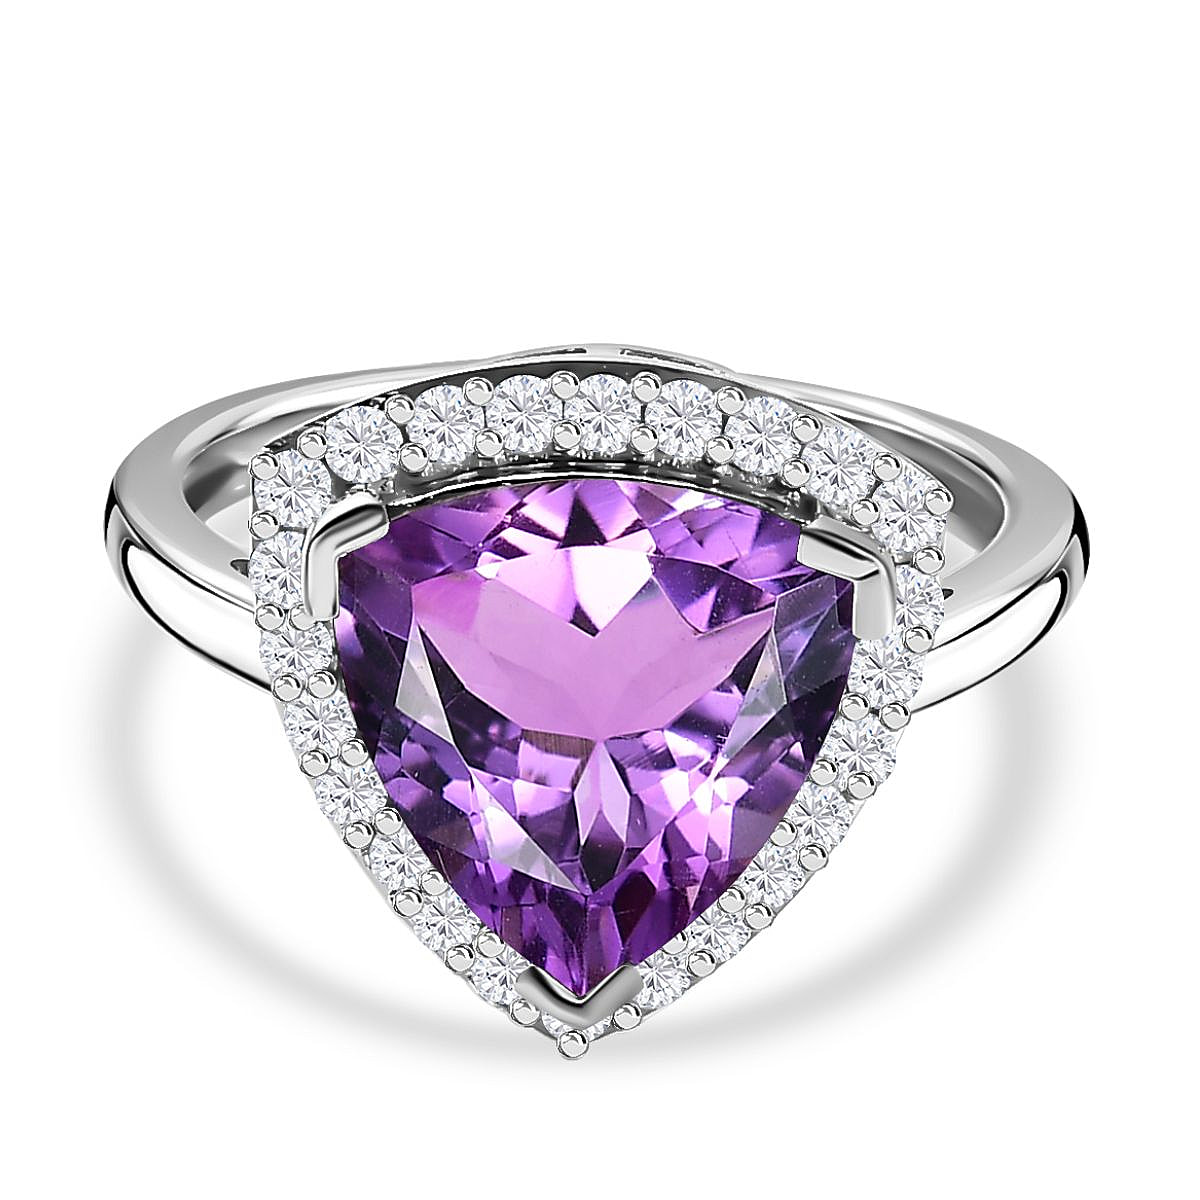 Rare Find Bolivian Amethyst & Natural Zircon Ring in Platinum Overlay Sterling Silver 3.50 Ct.